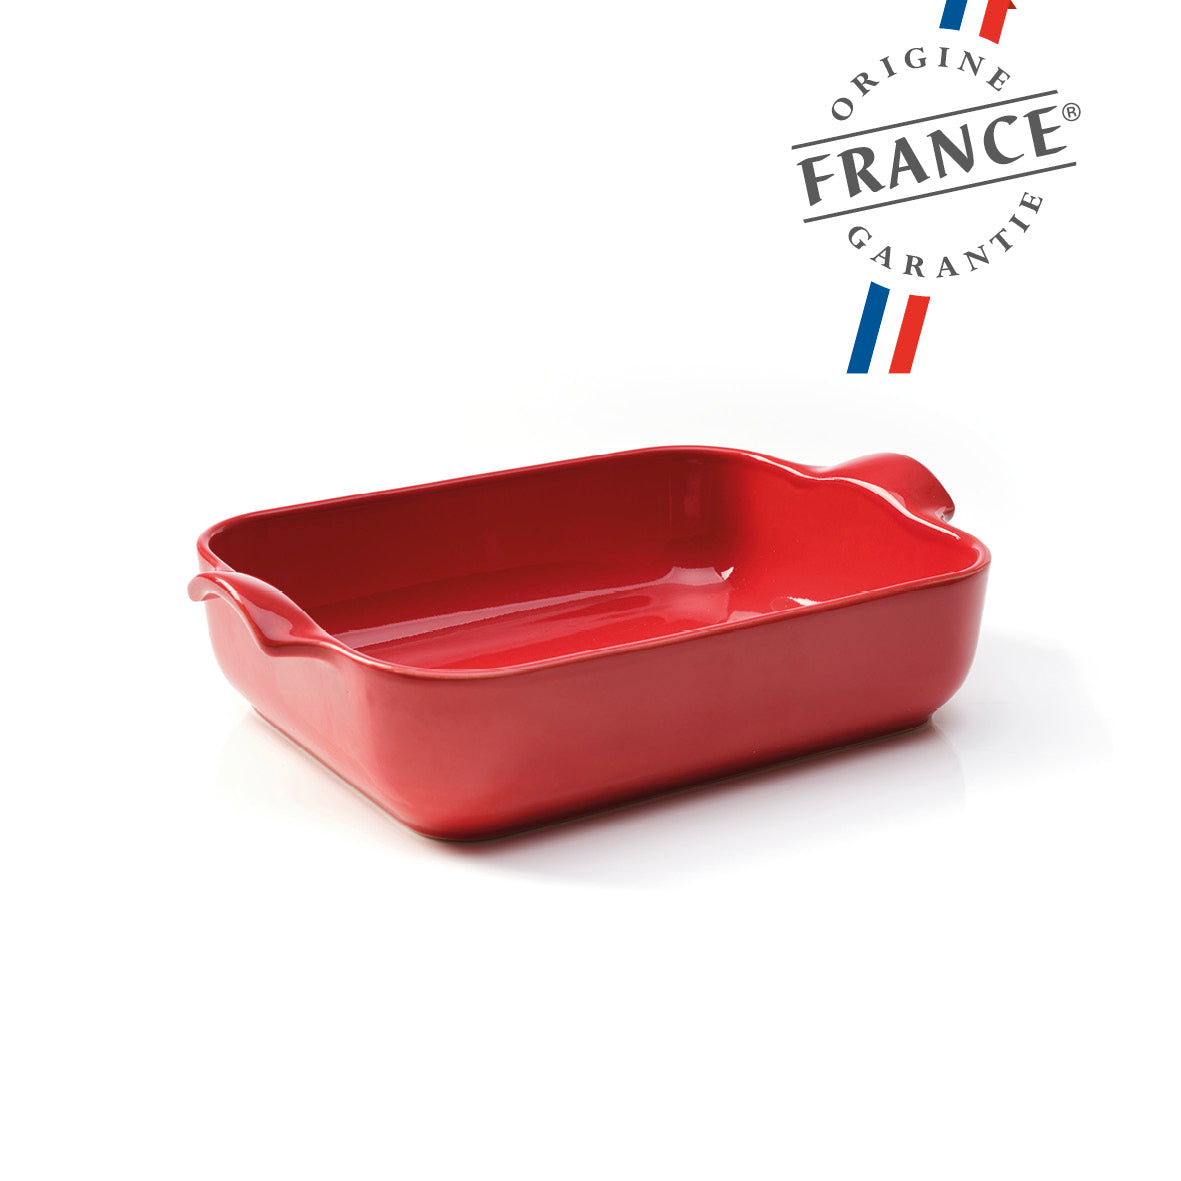 Ceramic oven dish - Made in France - 5L - 6-8 people Red